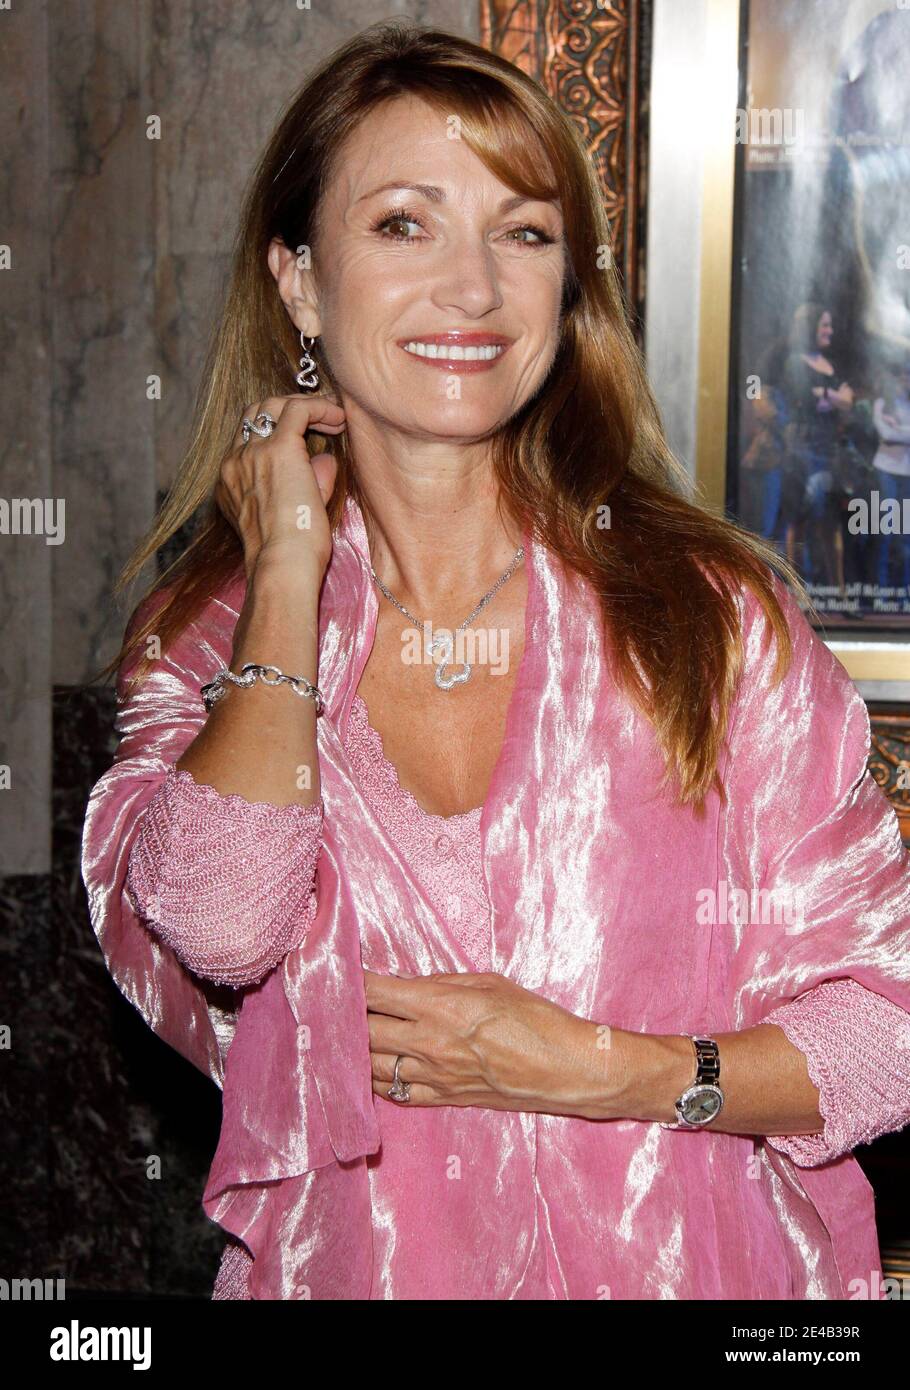 'Jane Seymour arrives for ''Legally Blonde The Musical'' Premiere held at Pantages Theatre in Los Angeles, CA, USA, on August 14, 2009. Photo by Tony DiMaio/ABACAPRESS.COM' Stock Photo